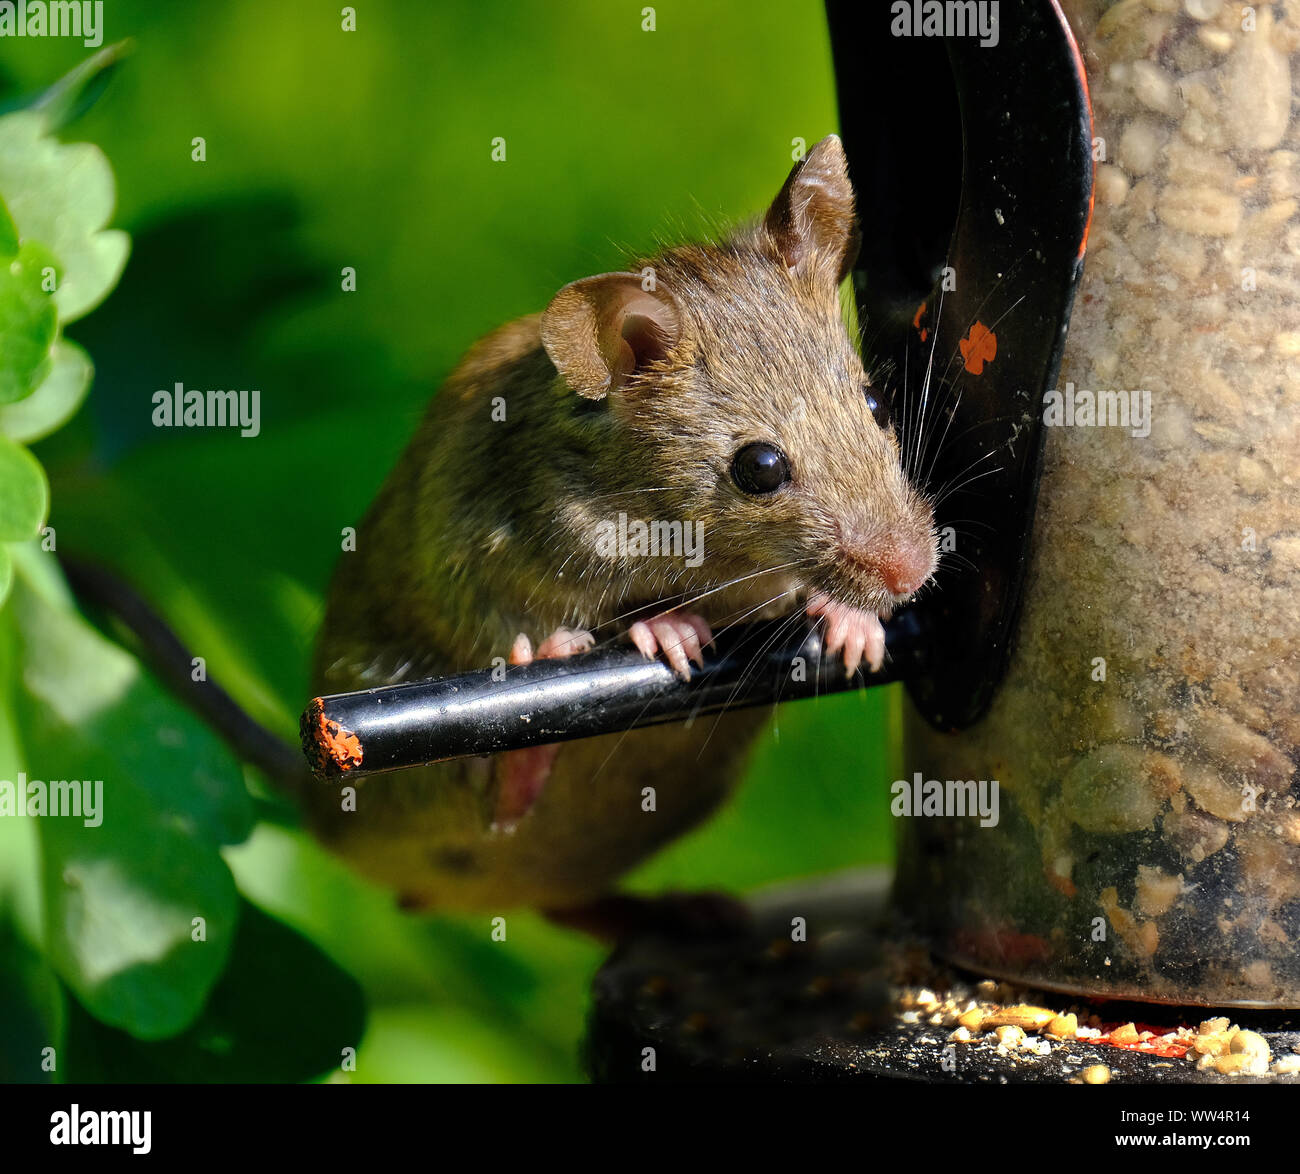 House mouse searching for food in urban house garden. Stock Photo